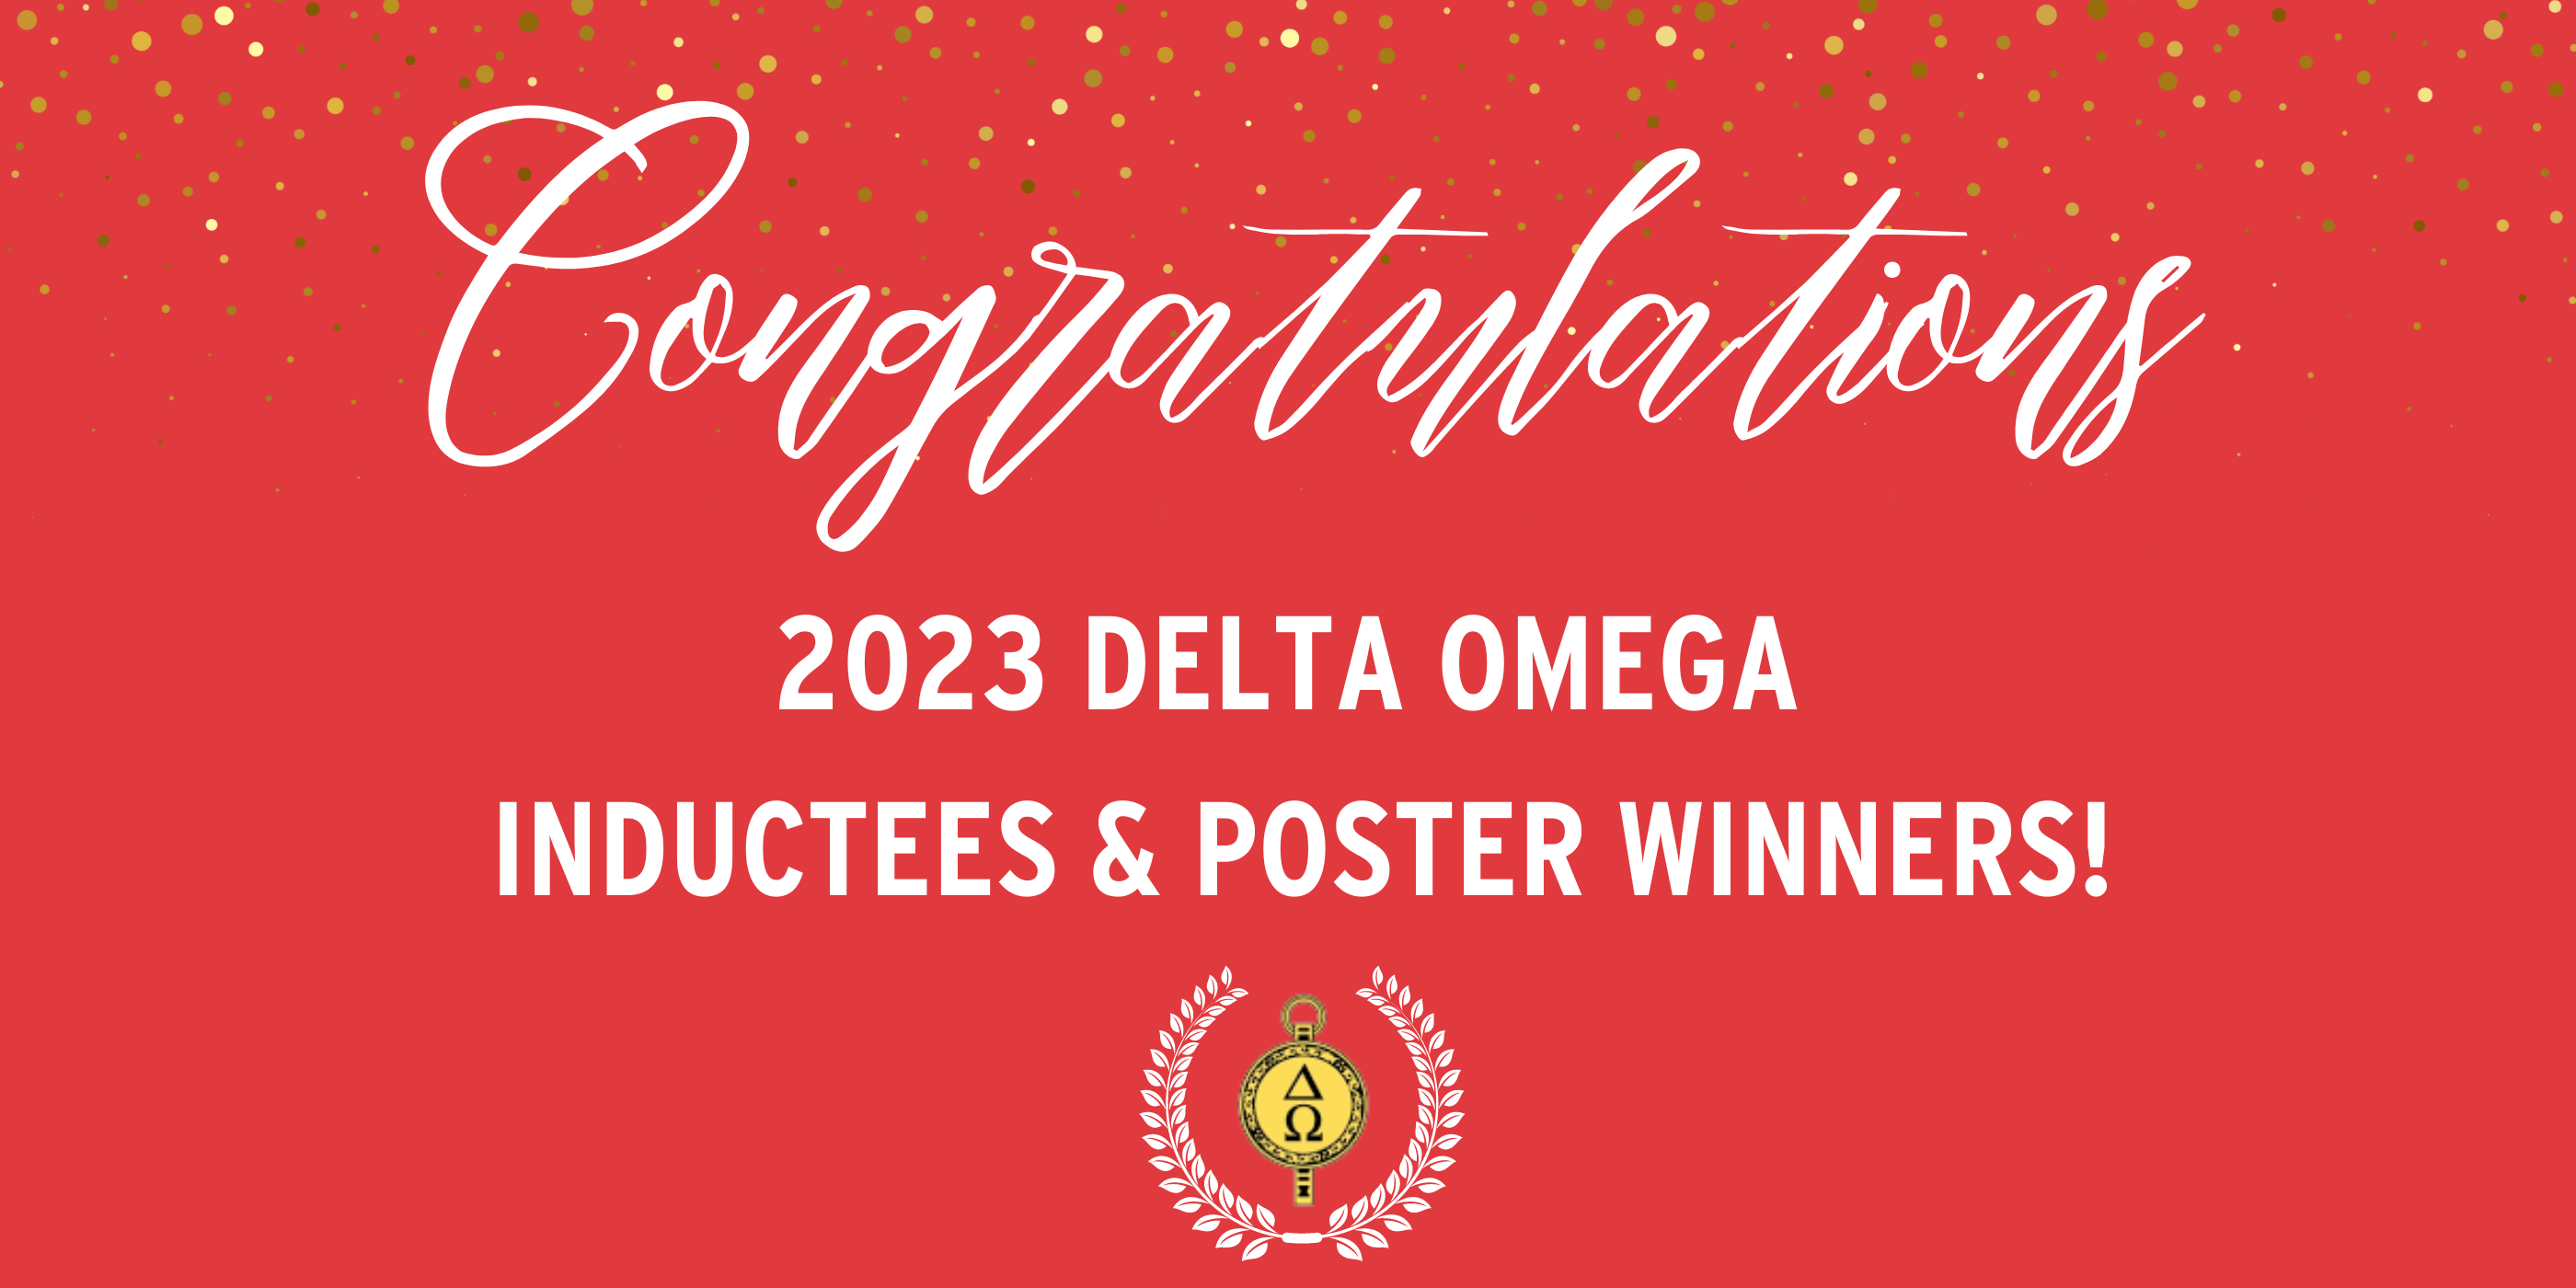 Congratulations 2023 Delta Omega Inductees and Poster Winners!